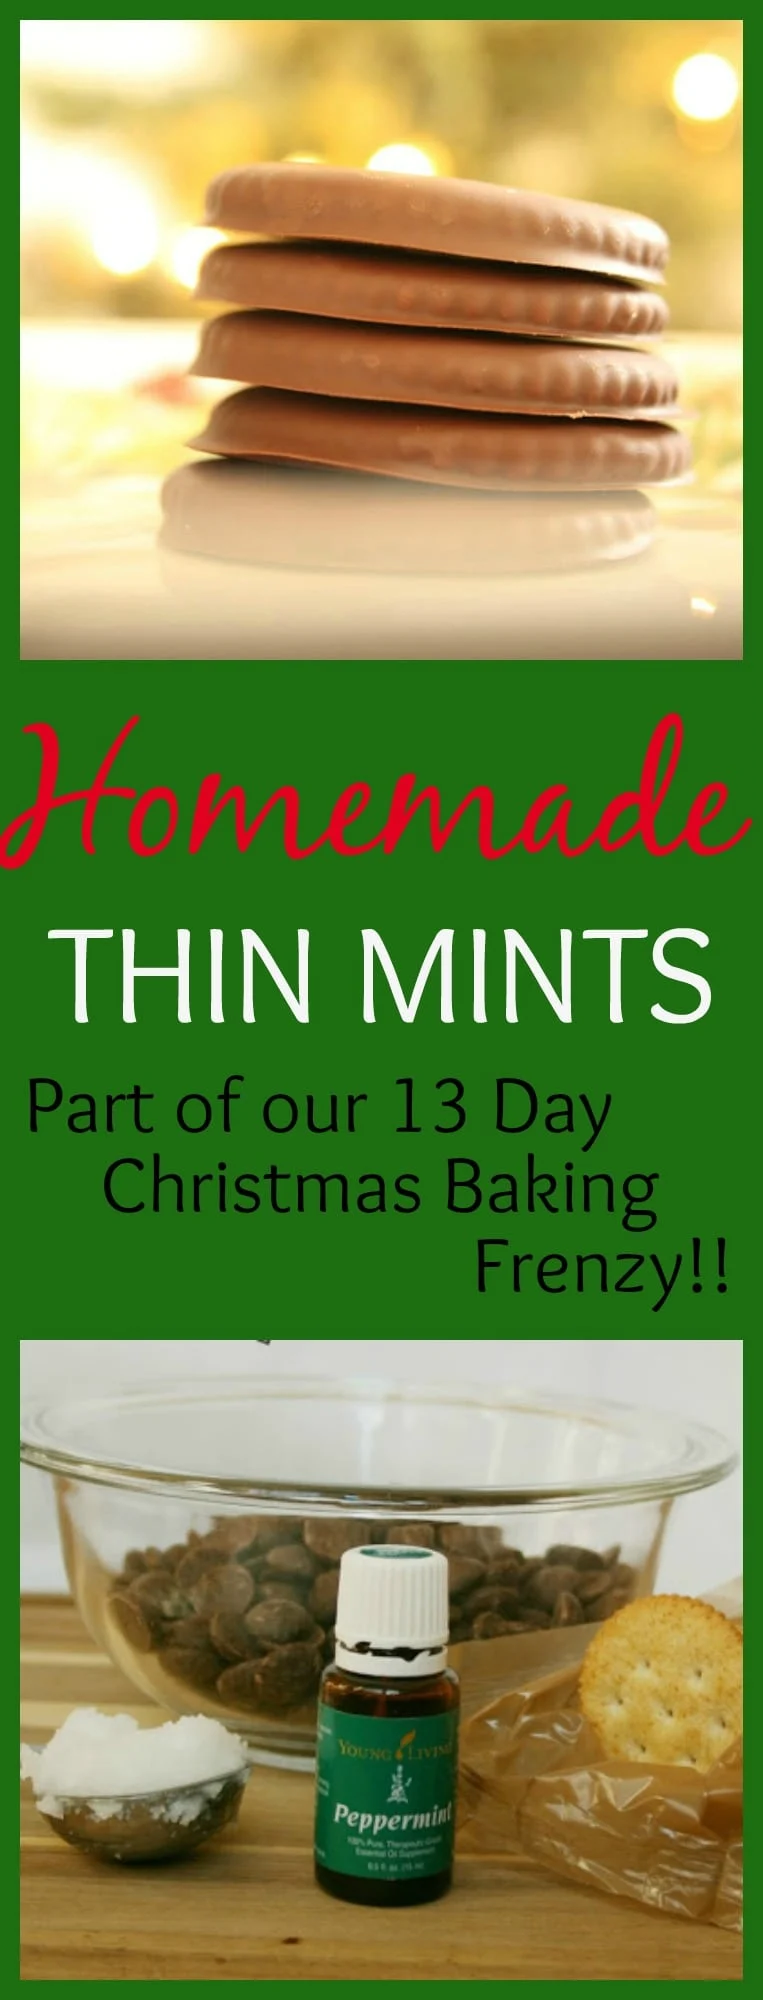 Homemade Thin Mint Recipe- A simple, 4-ingredient recipe for everyone's favorite cookie! Part of our 13 Days of Christmas Baking !